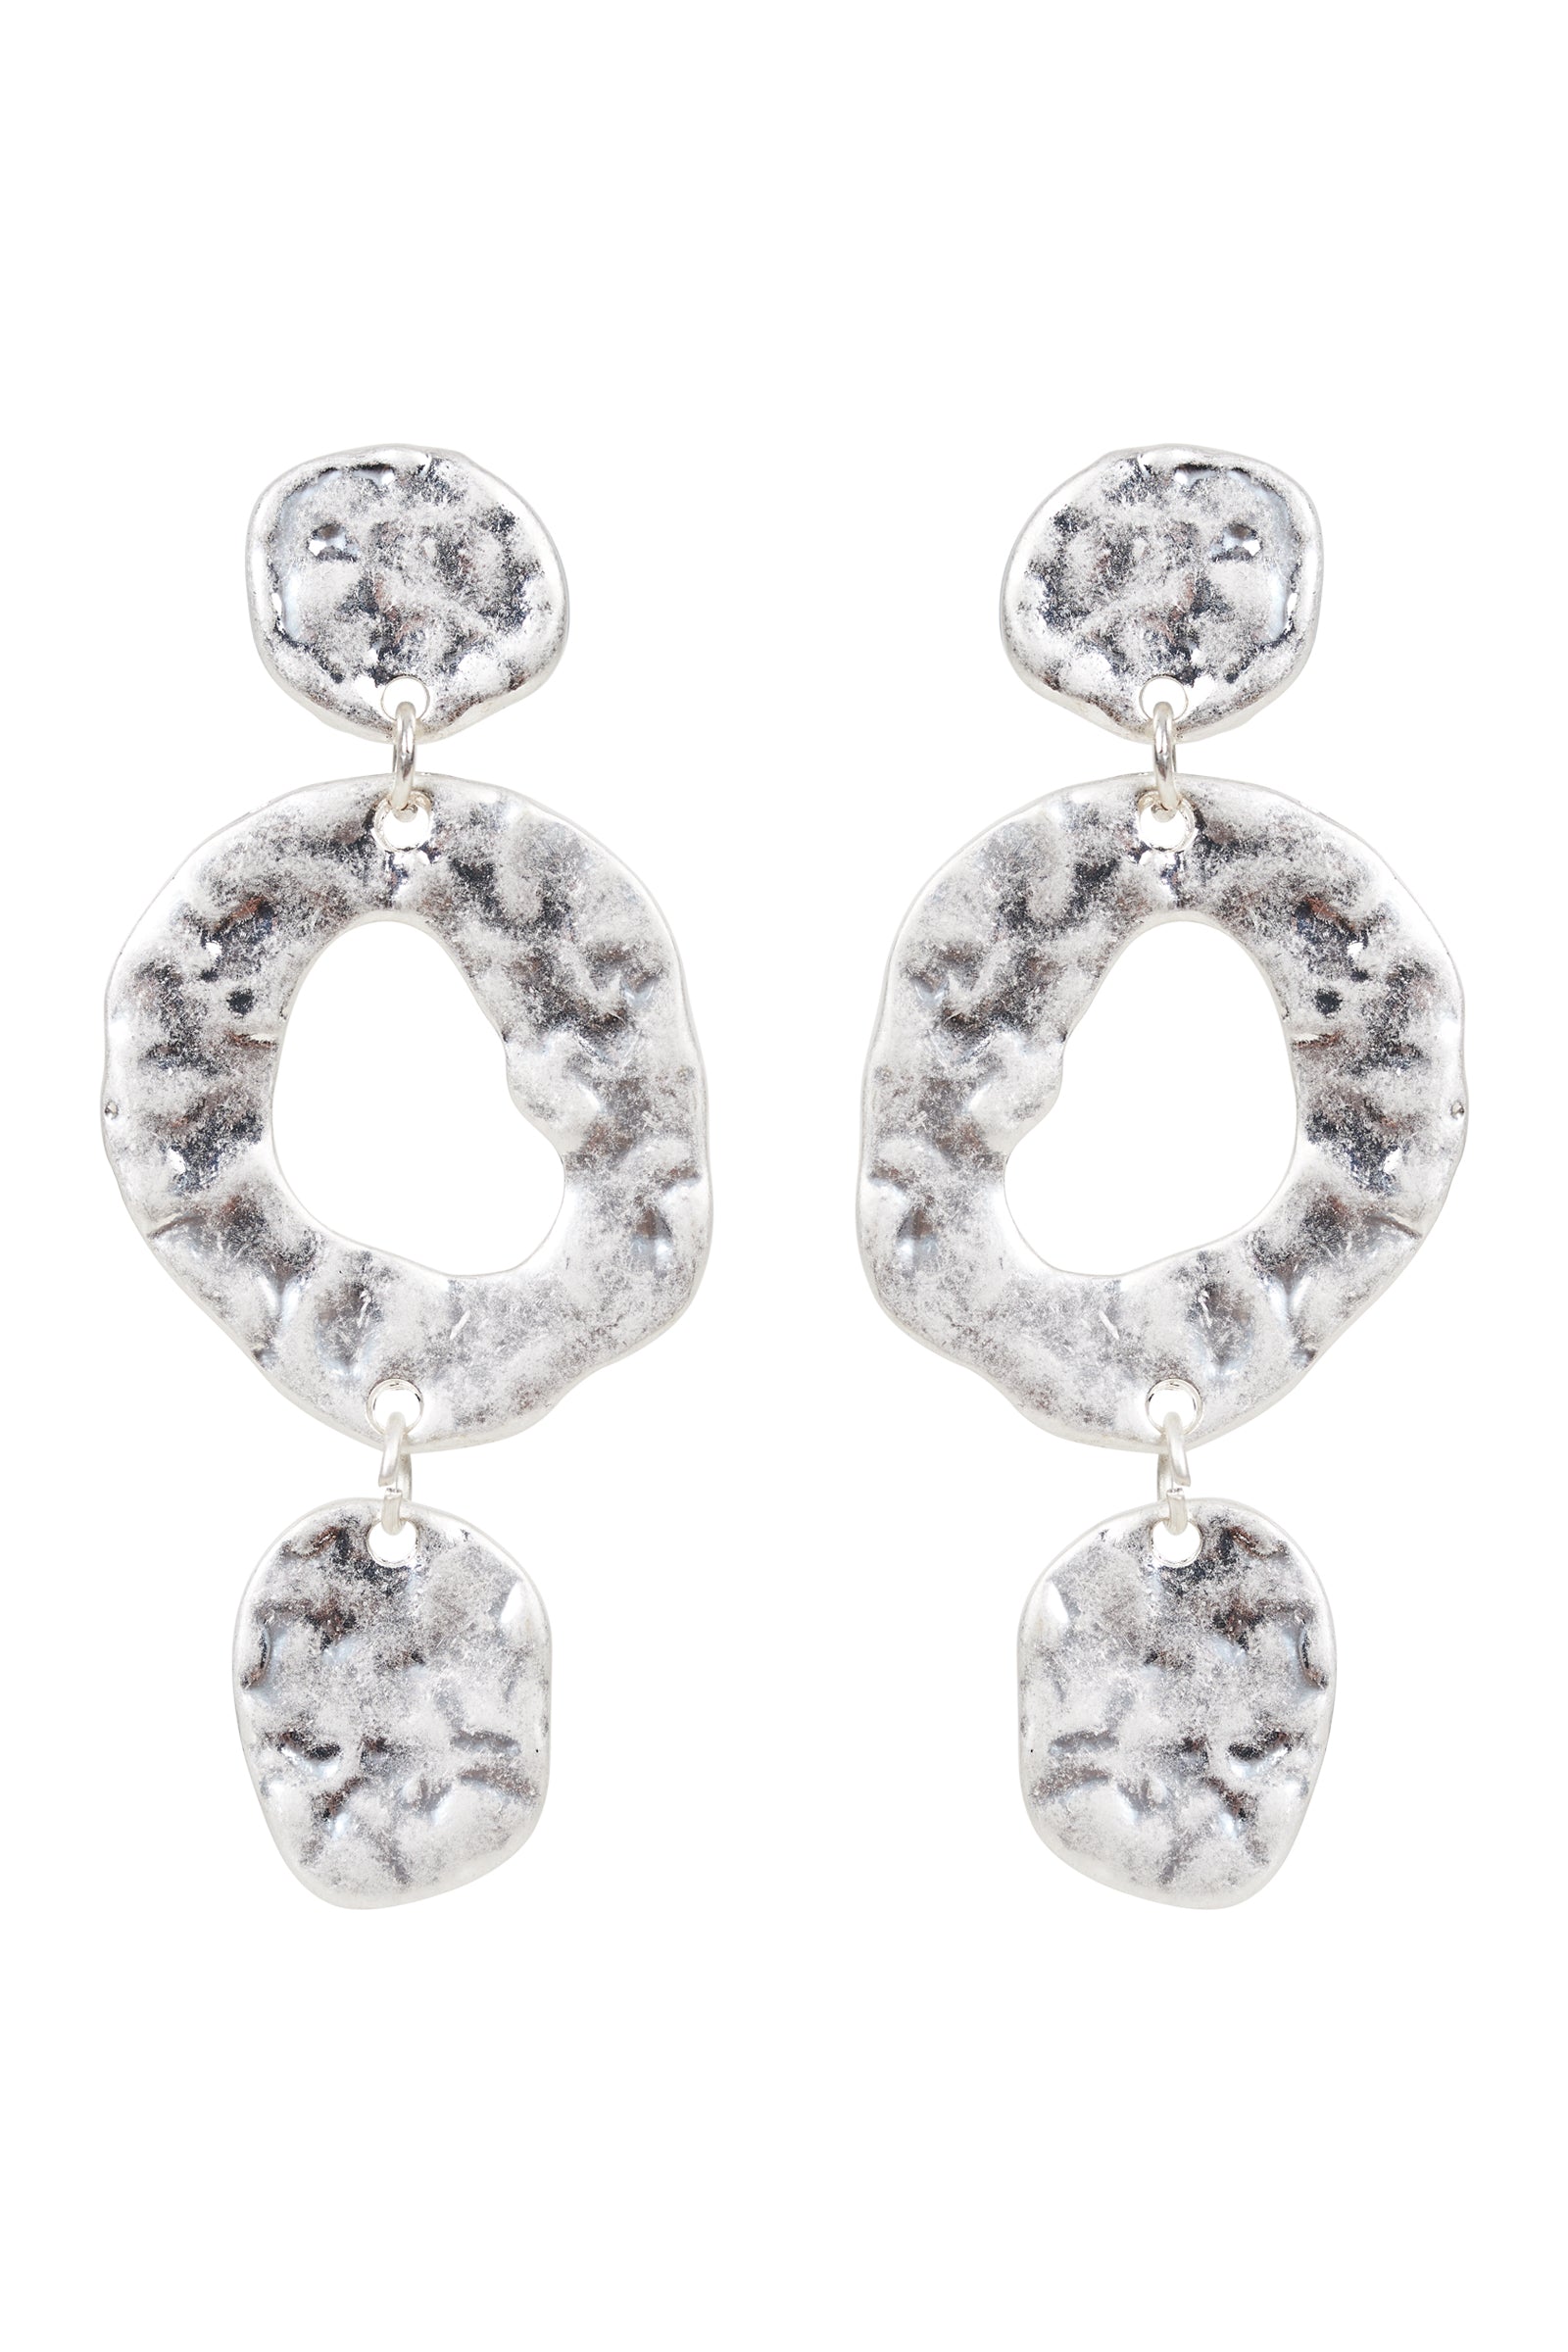 Paarl Circle Earring - Silver - eb&ive Earring